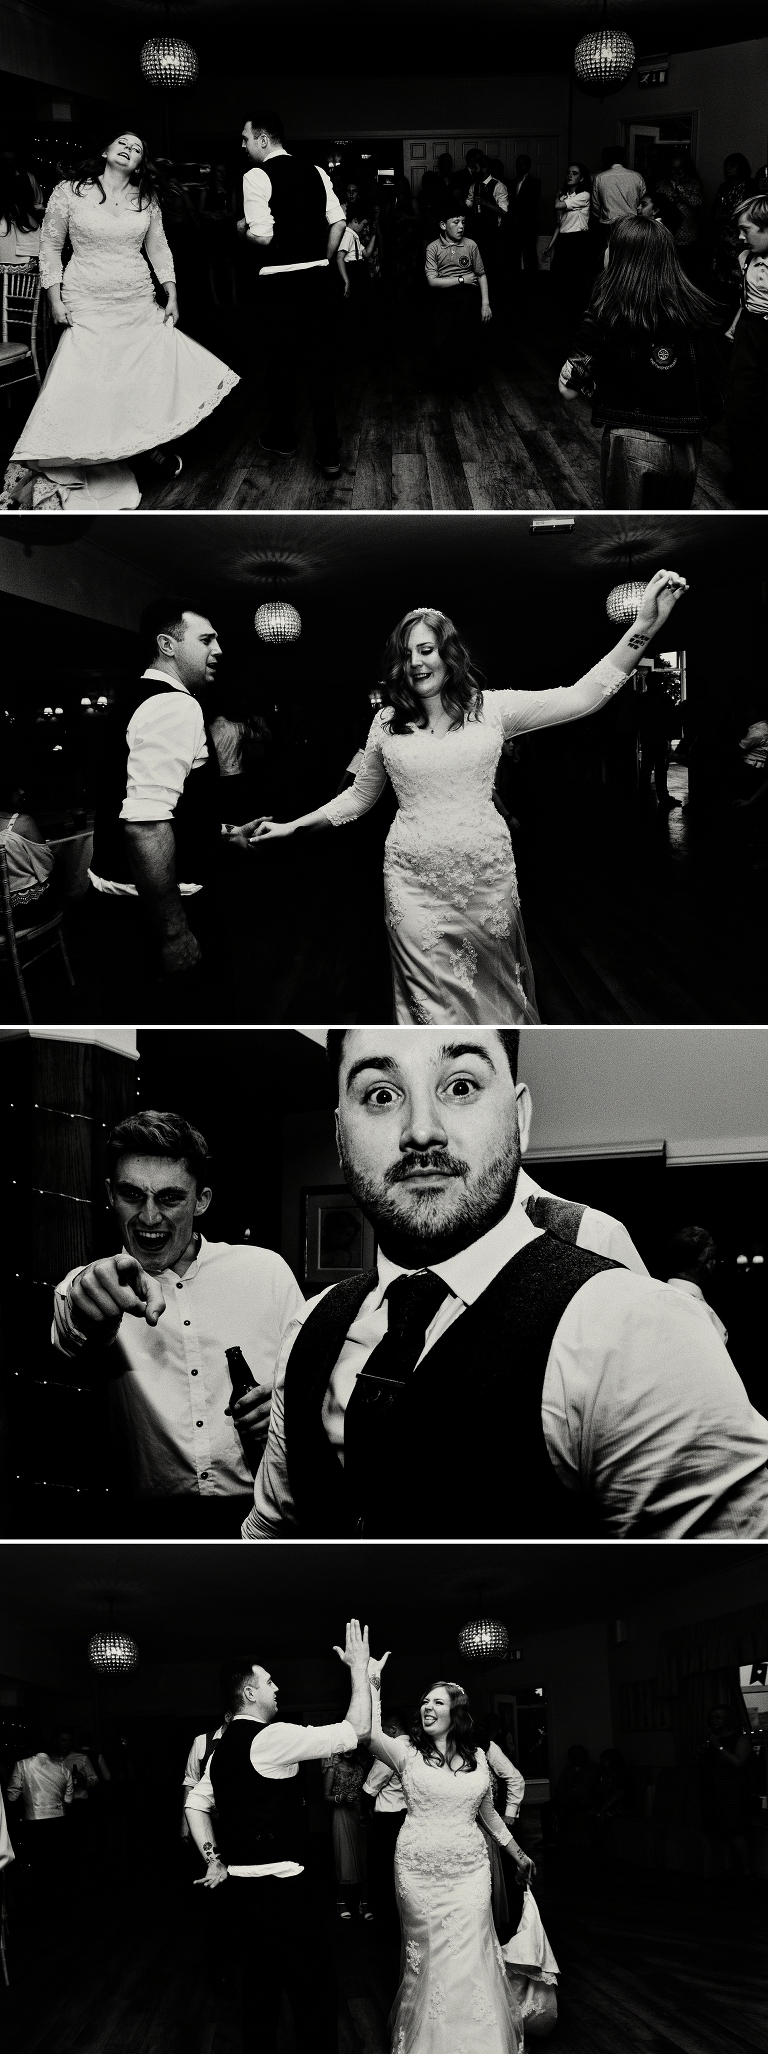 Black and white photograhs of dancing at a shireburn arms wedding in lancashire